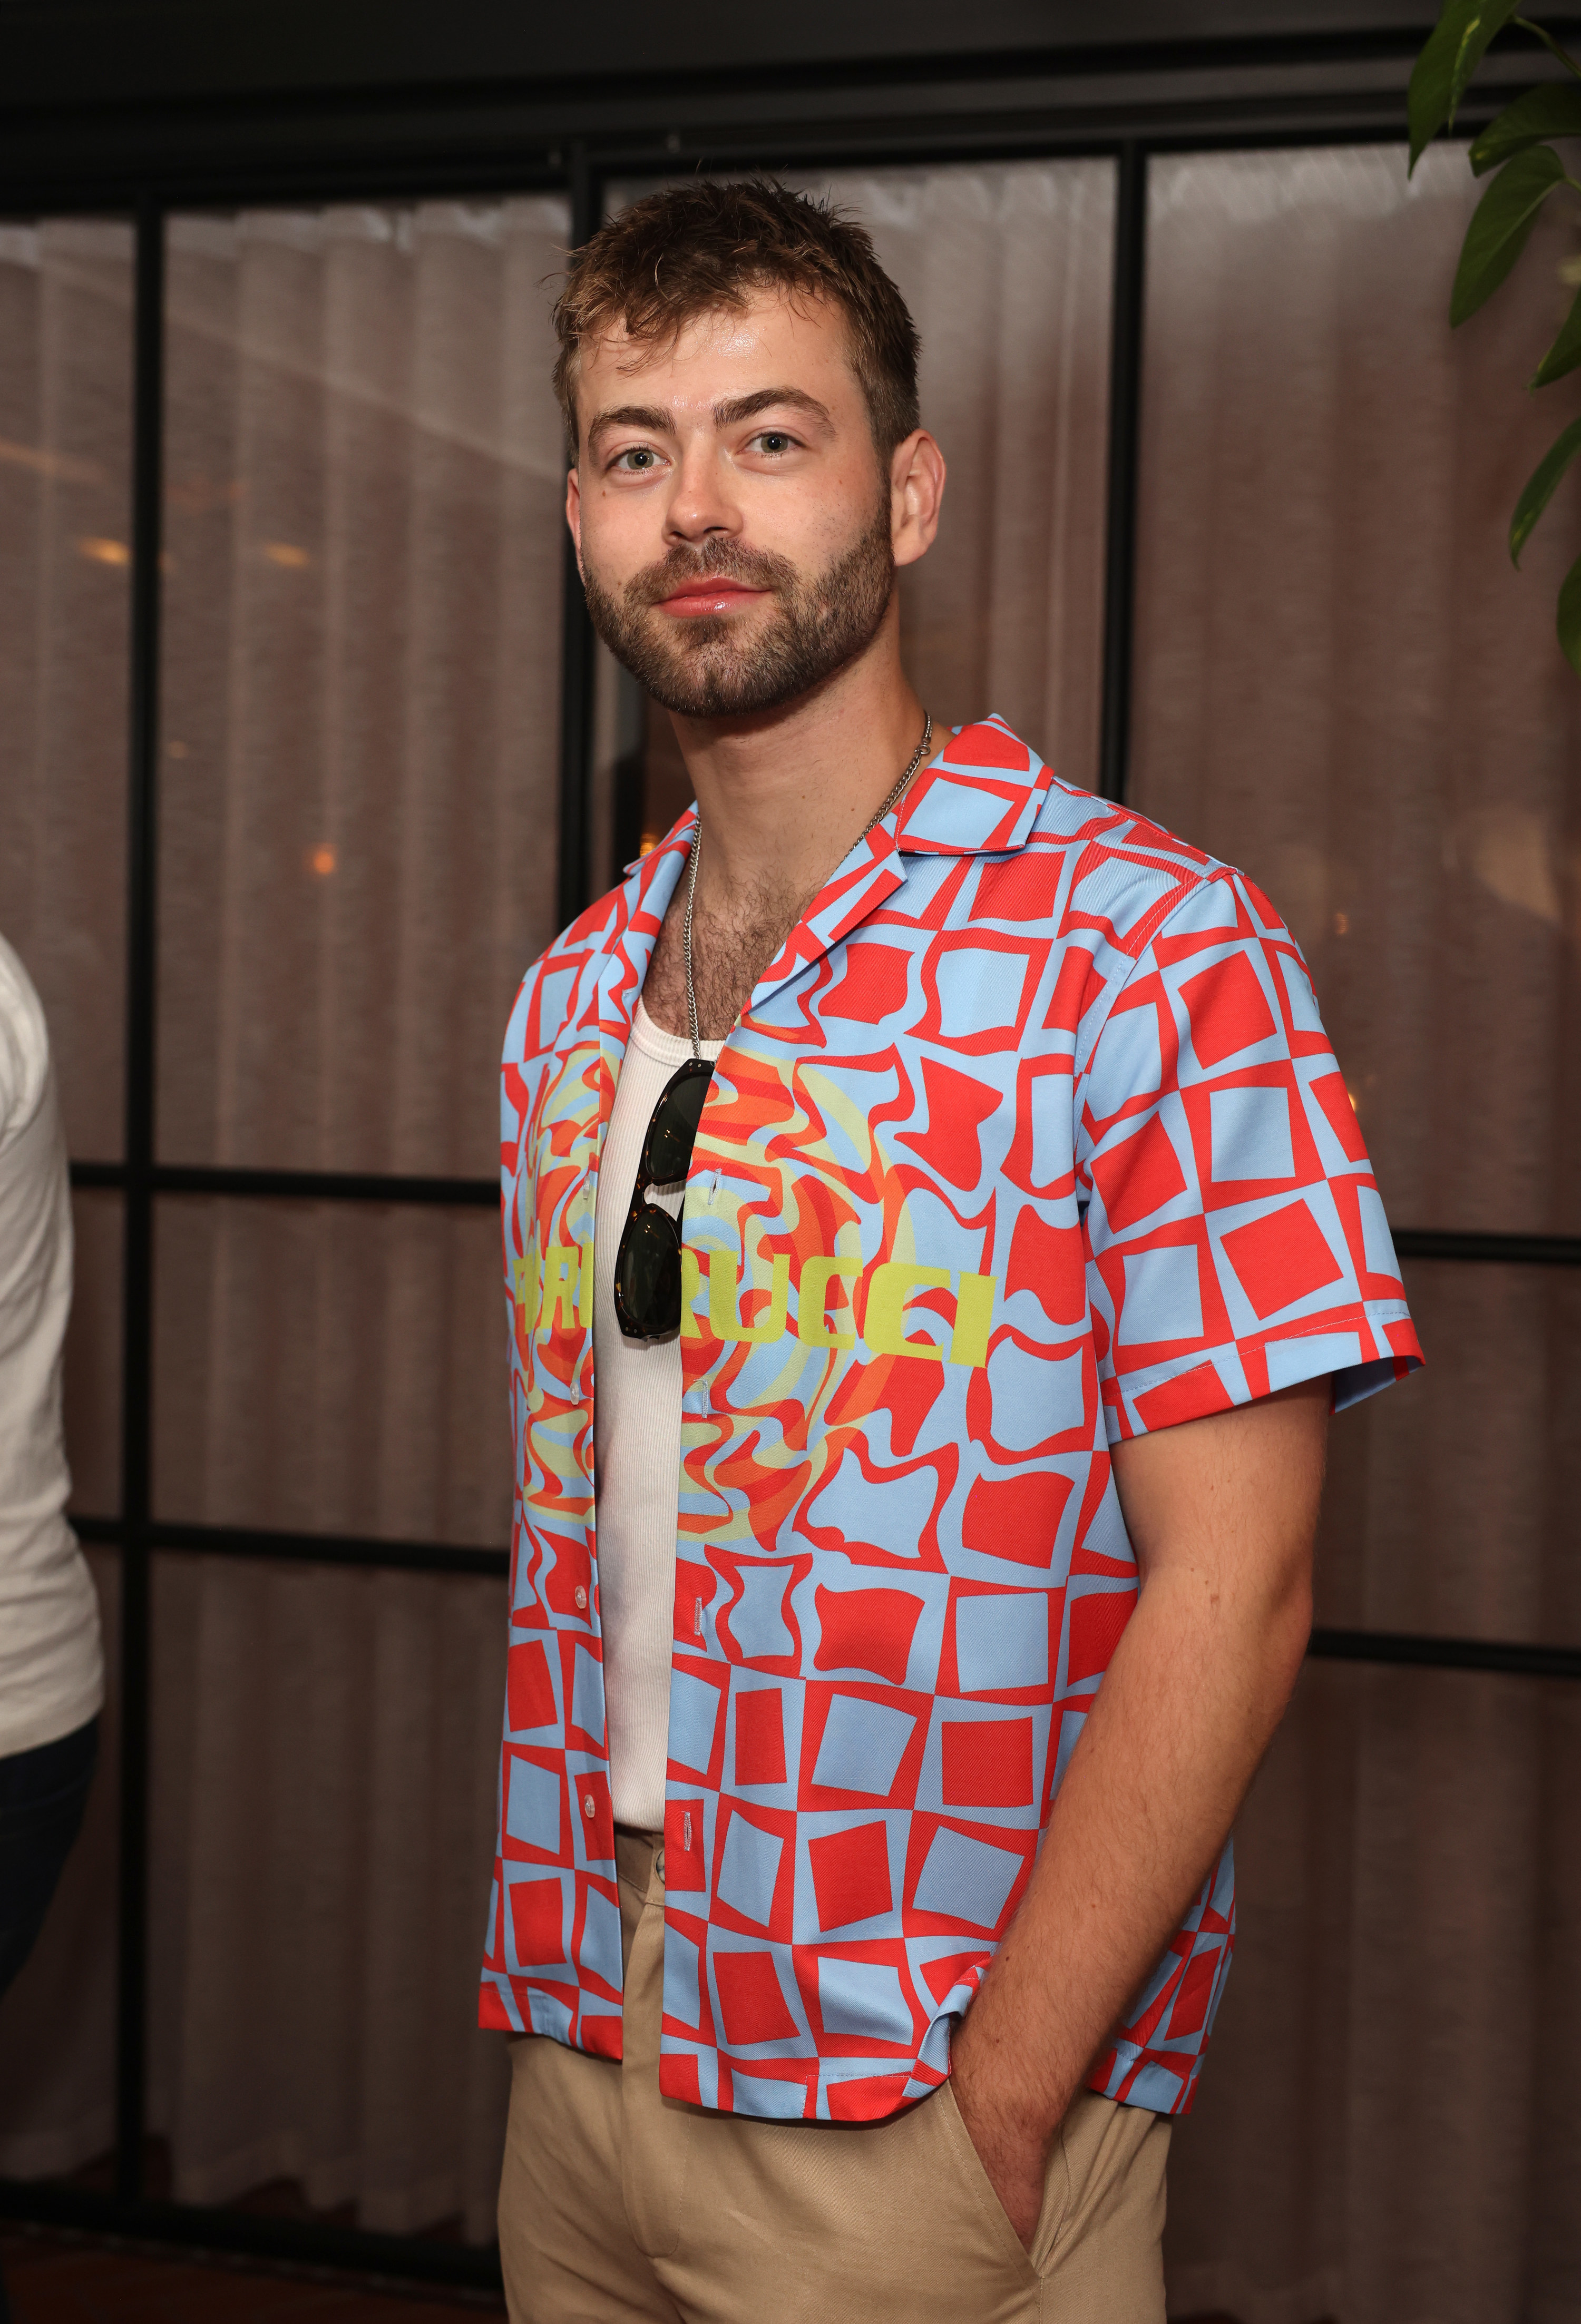 Cassius Taylor attends the Fiorucci pop-up launch party at 100 Shoreditch on September 01, 2022